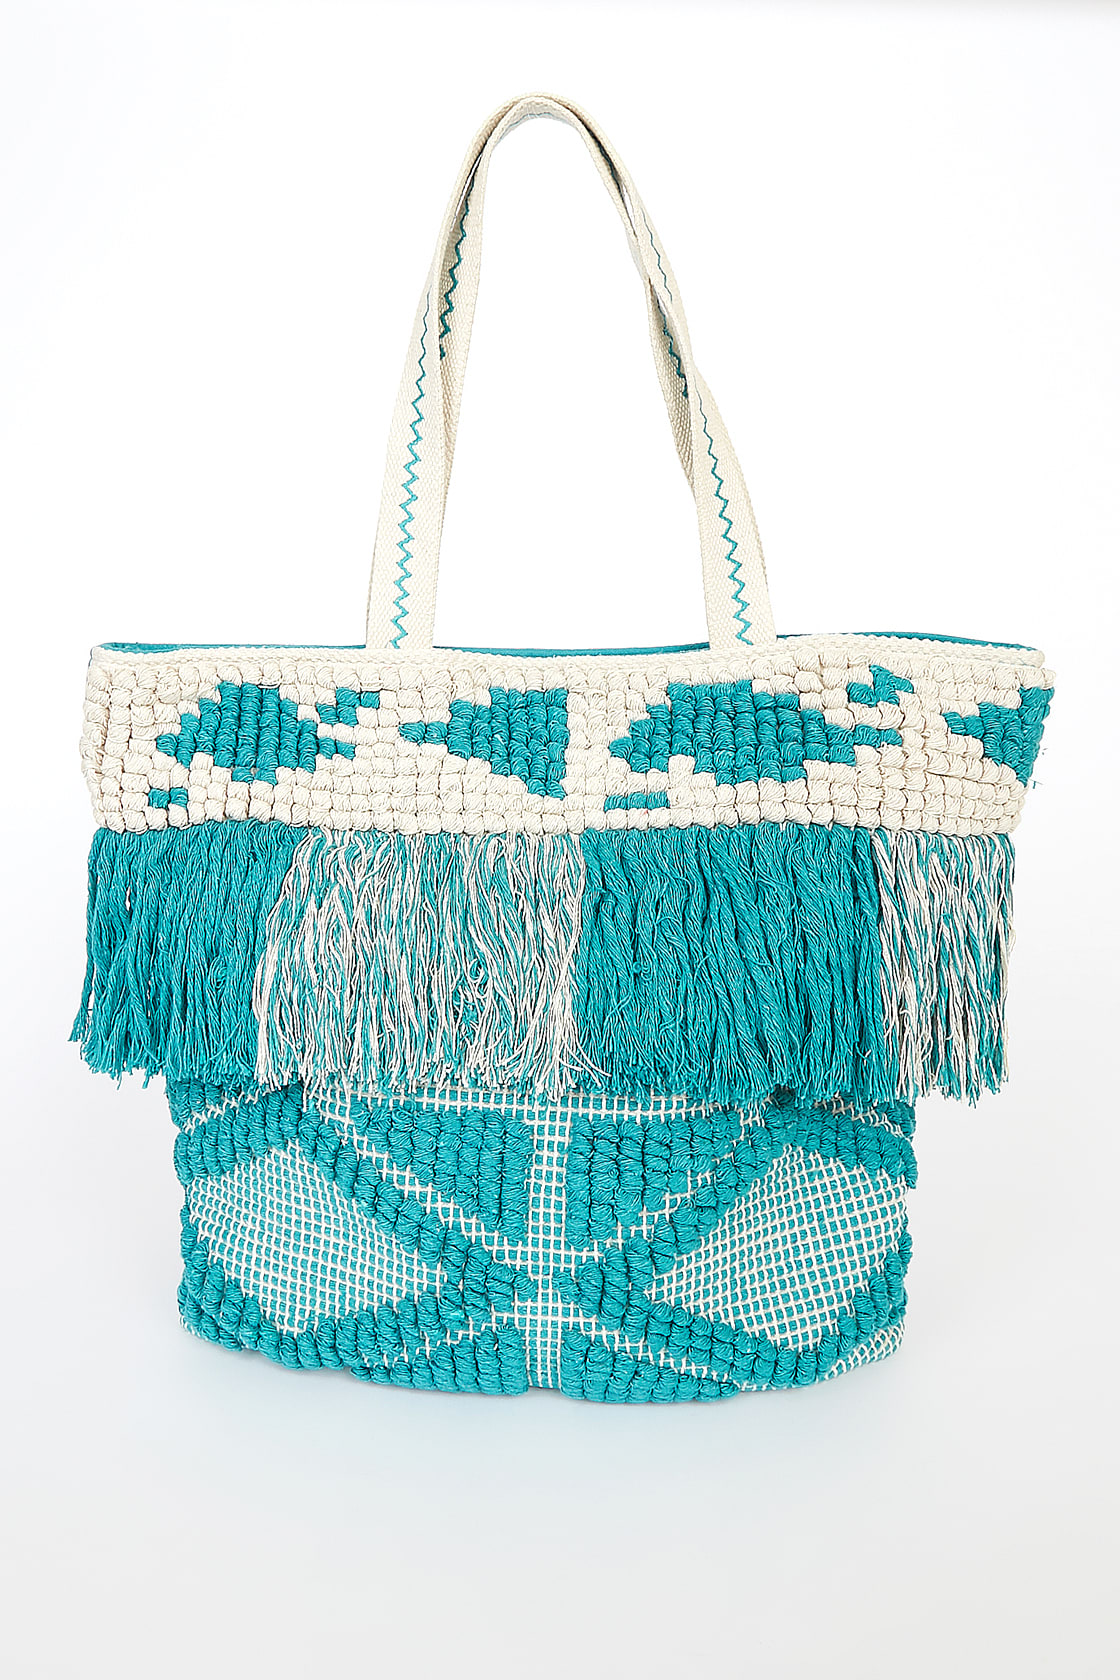 This roomy, flat-bottom tote is shaped by turquoise and beige woven fabric. It makes a great gift for your lady who's really into the beach.